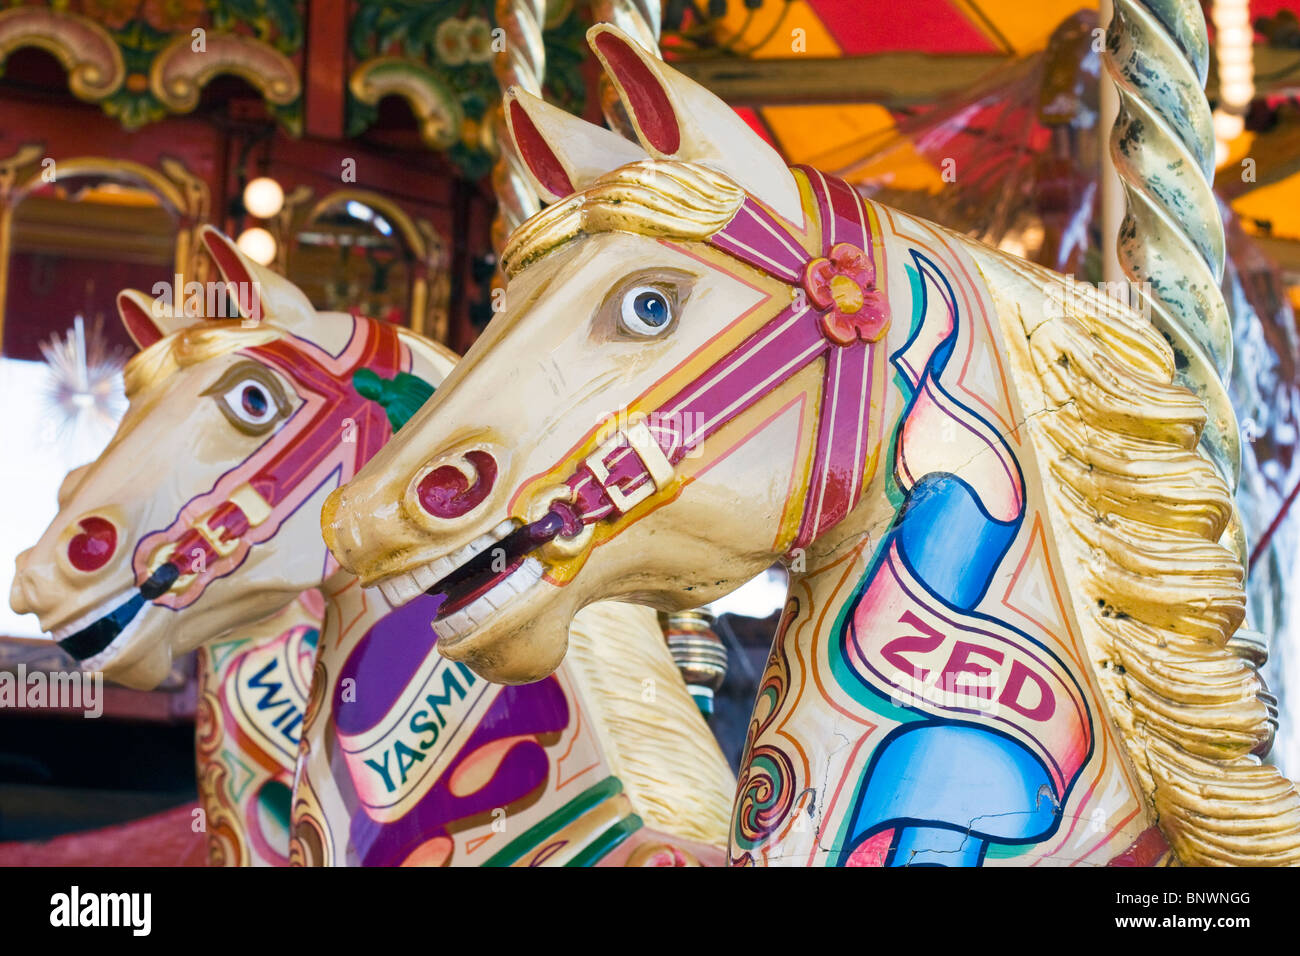 Traditional Fairground galloping horses Stock Photo